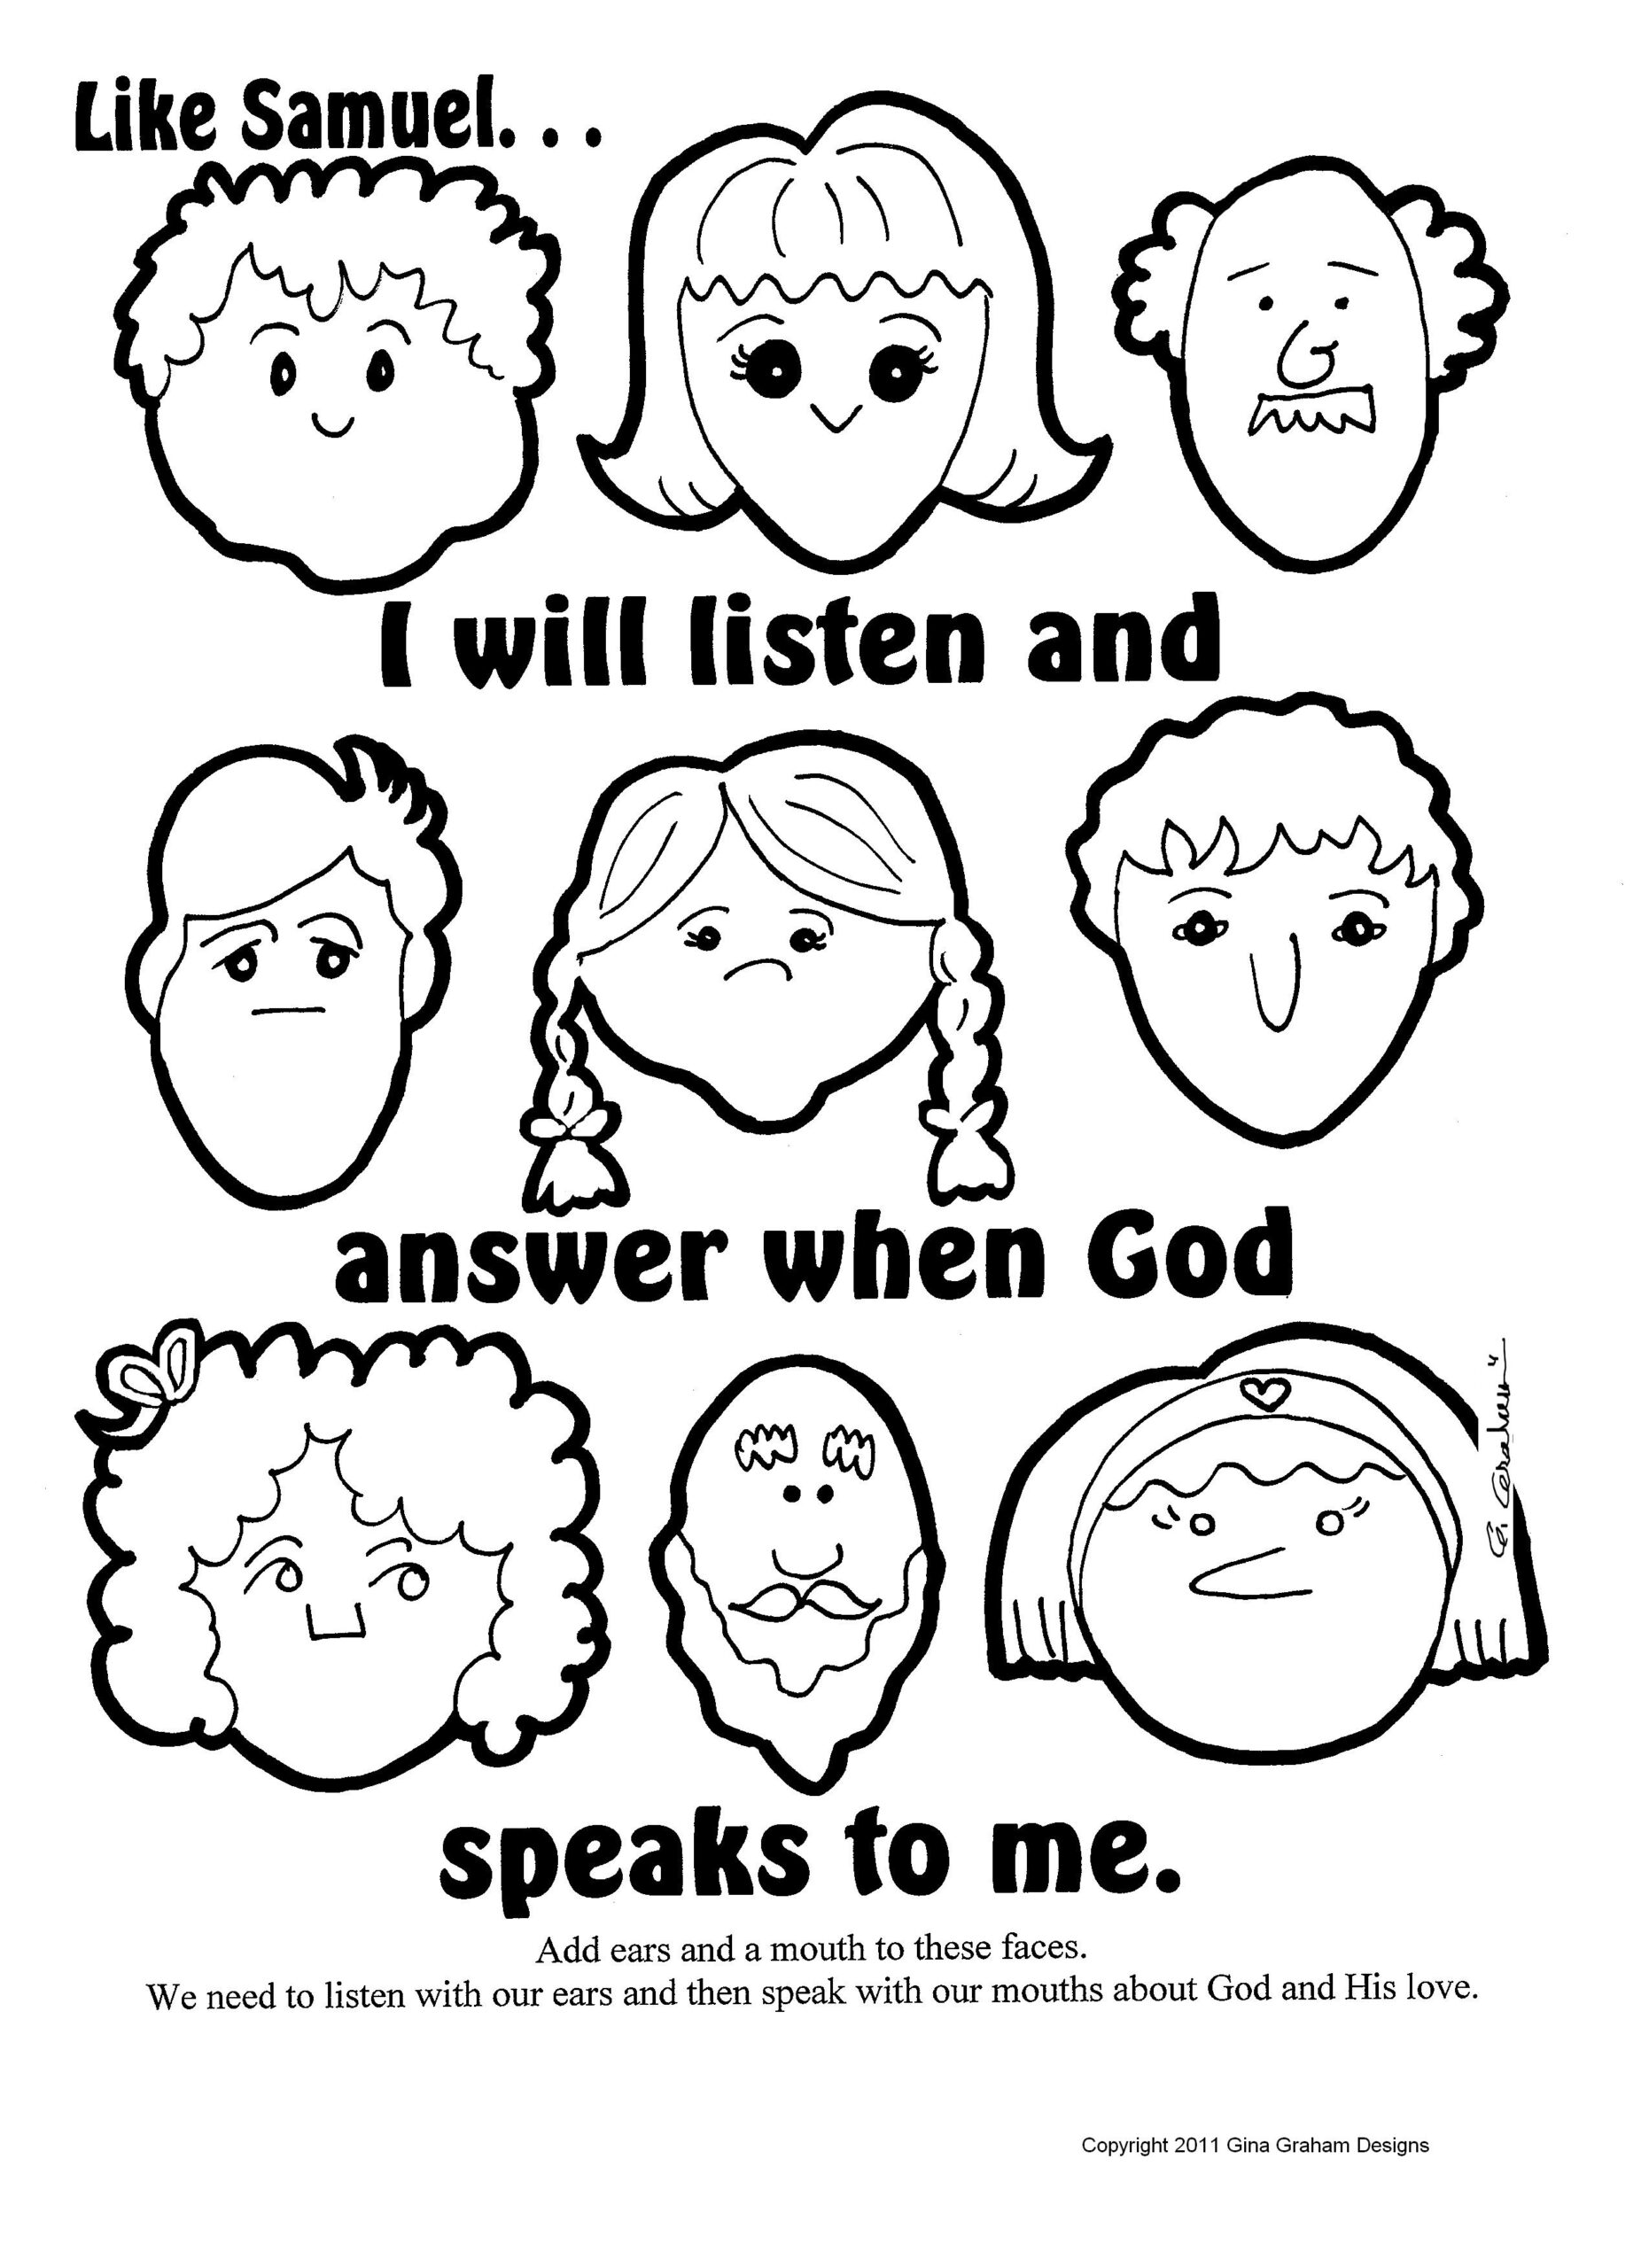 Not Too Bad Of A Coloring Sheet For Our Samuel Lesson Sunday School Coloring Pages Bible Crafts Preschool Bible